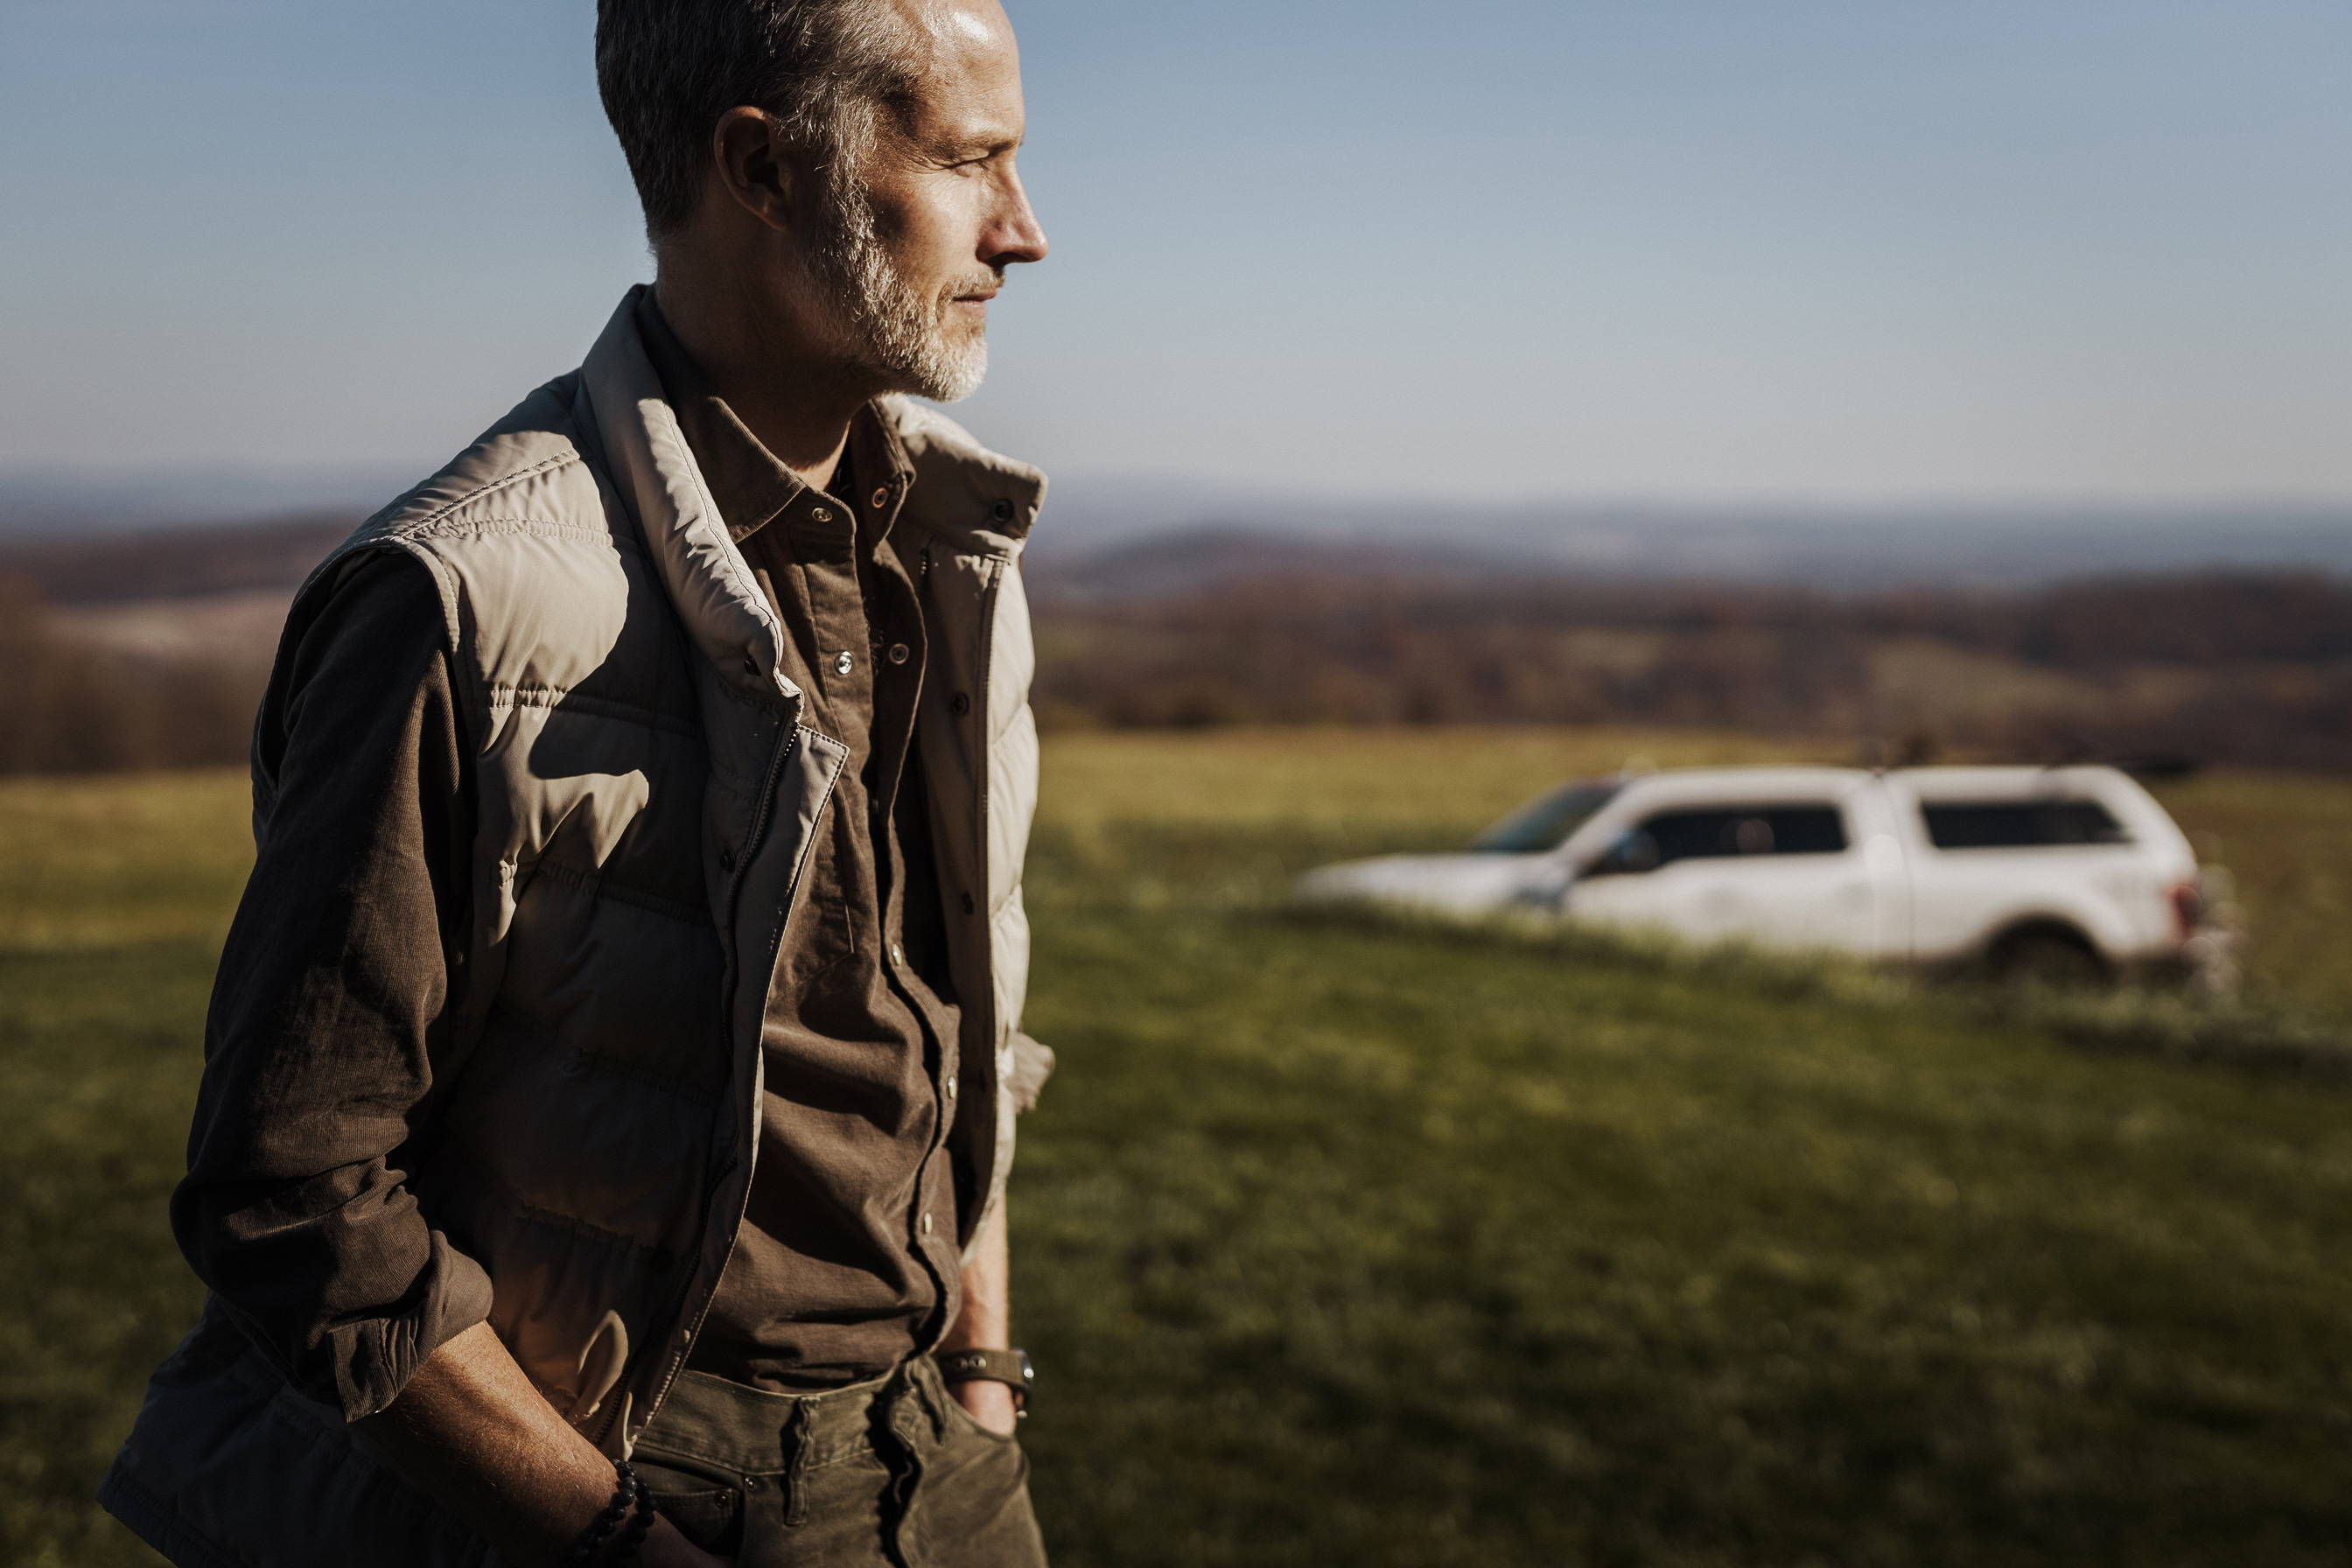 A man looking off into the distance wearing a vest and a corduroy shirt.